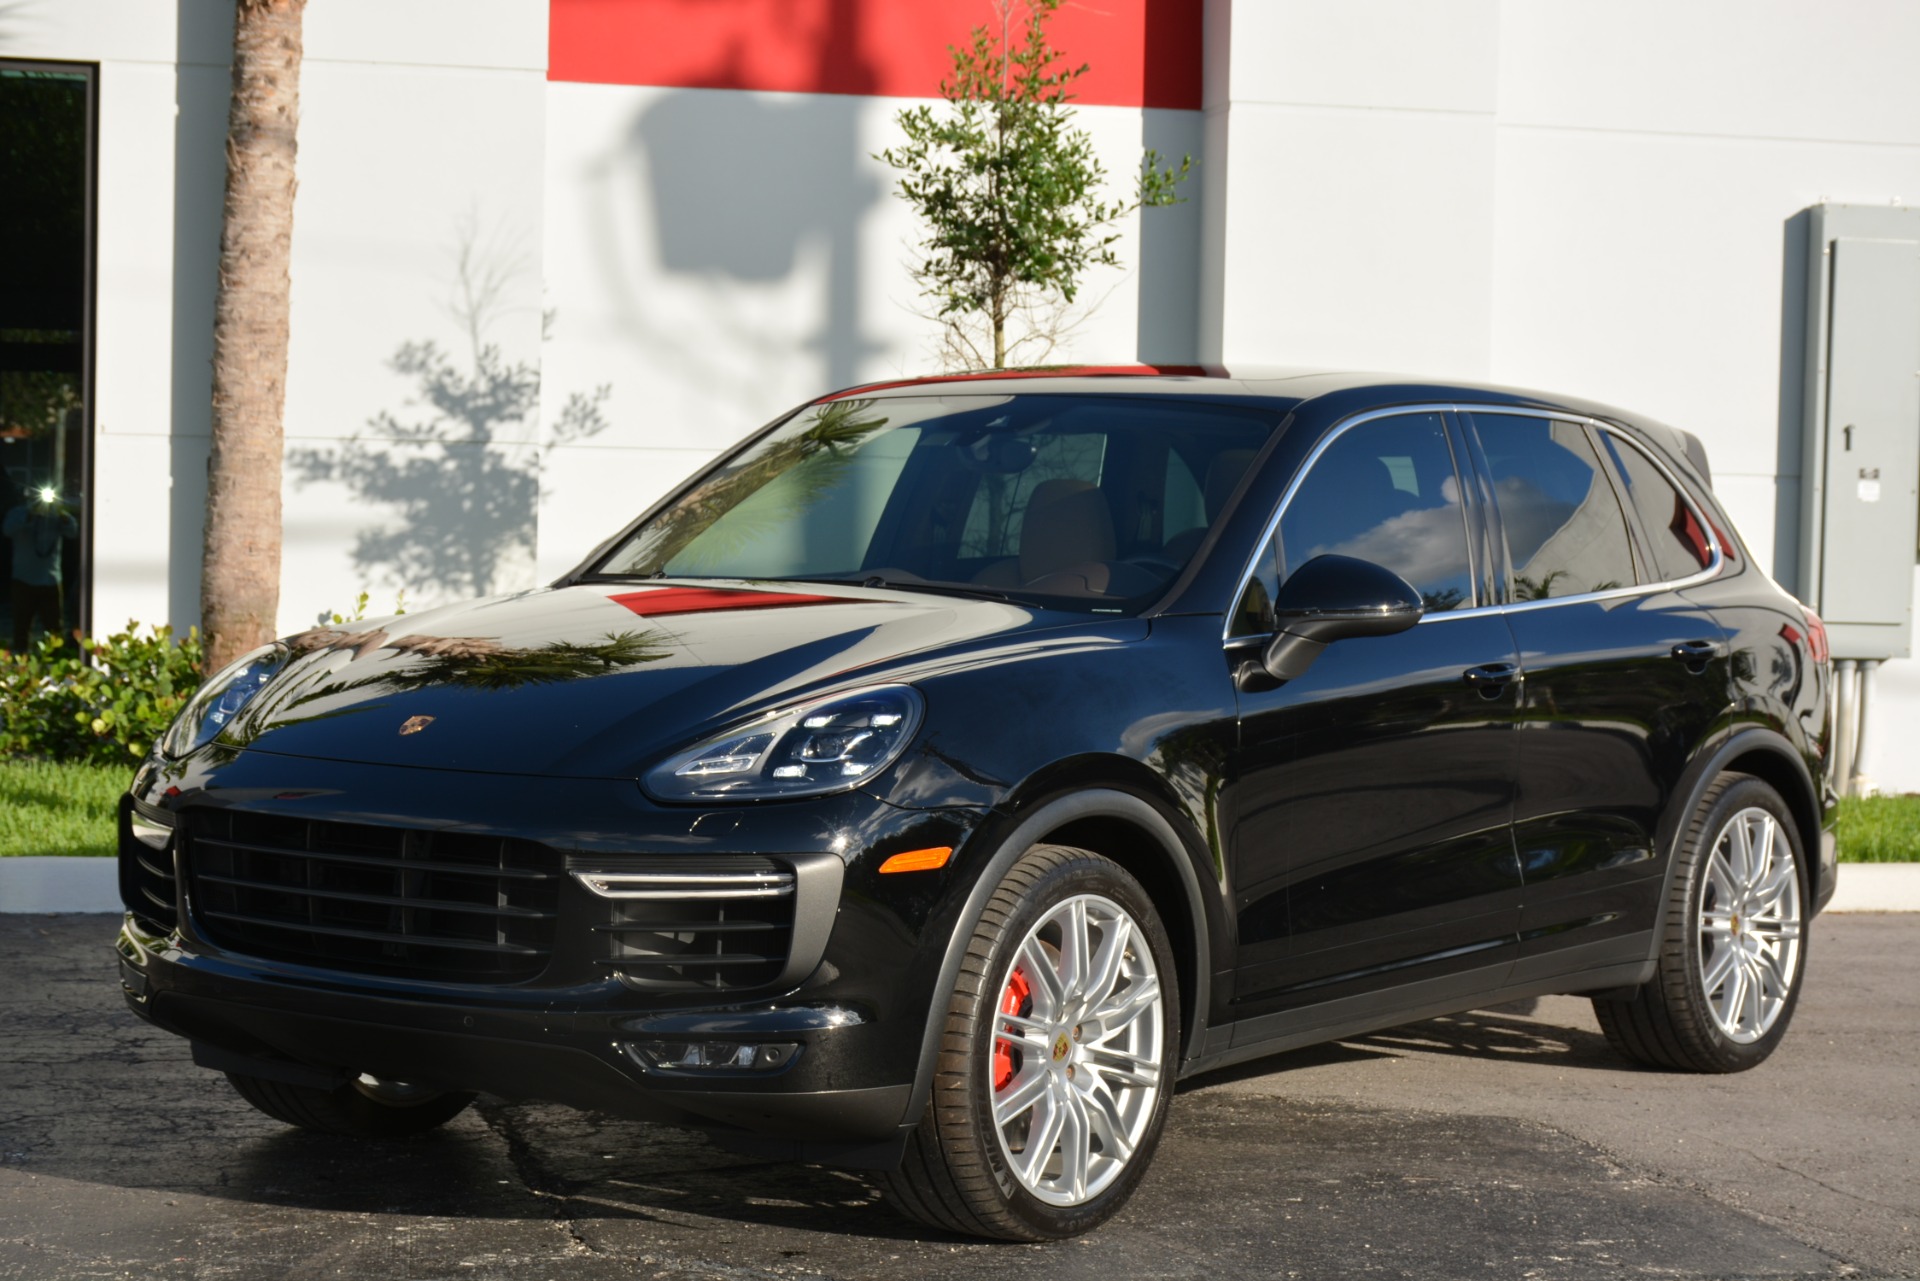 Used 2016 Porsche Cayenne Turbo For Sale ($67,900) | Marino Performance